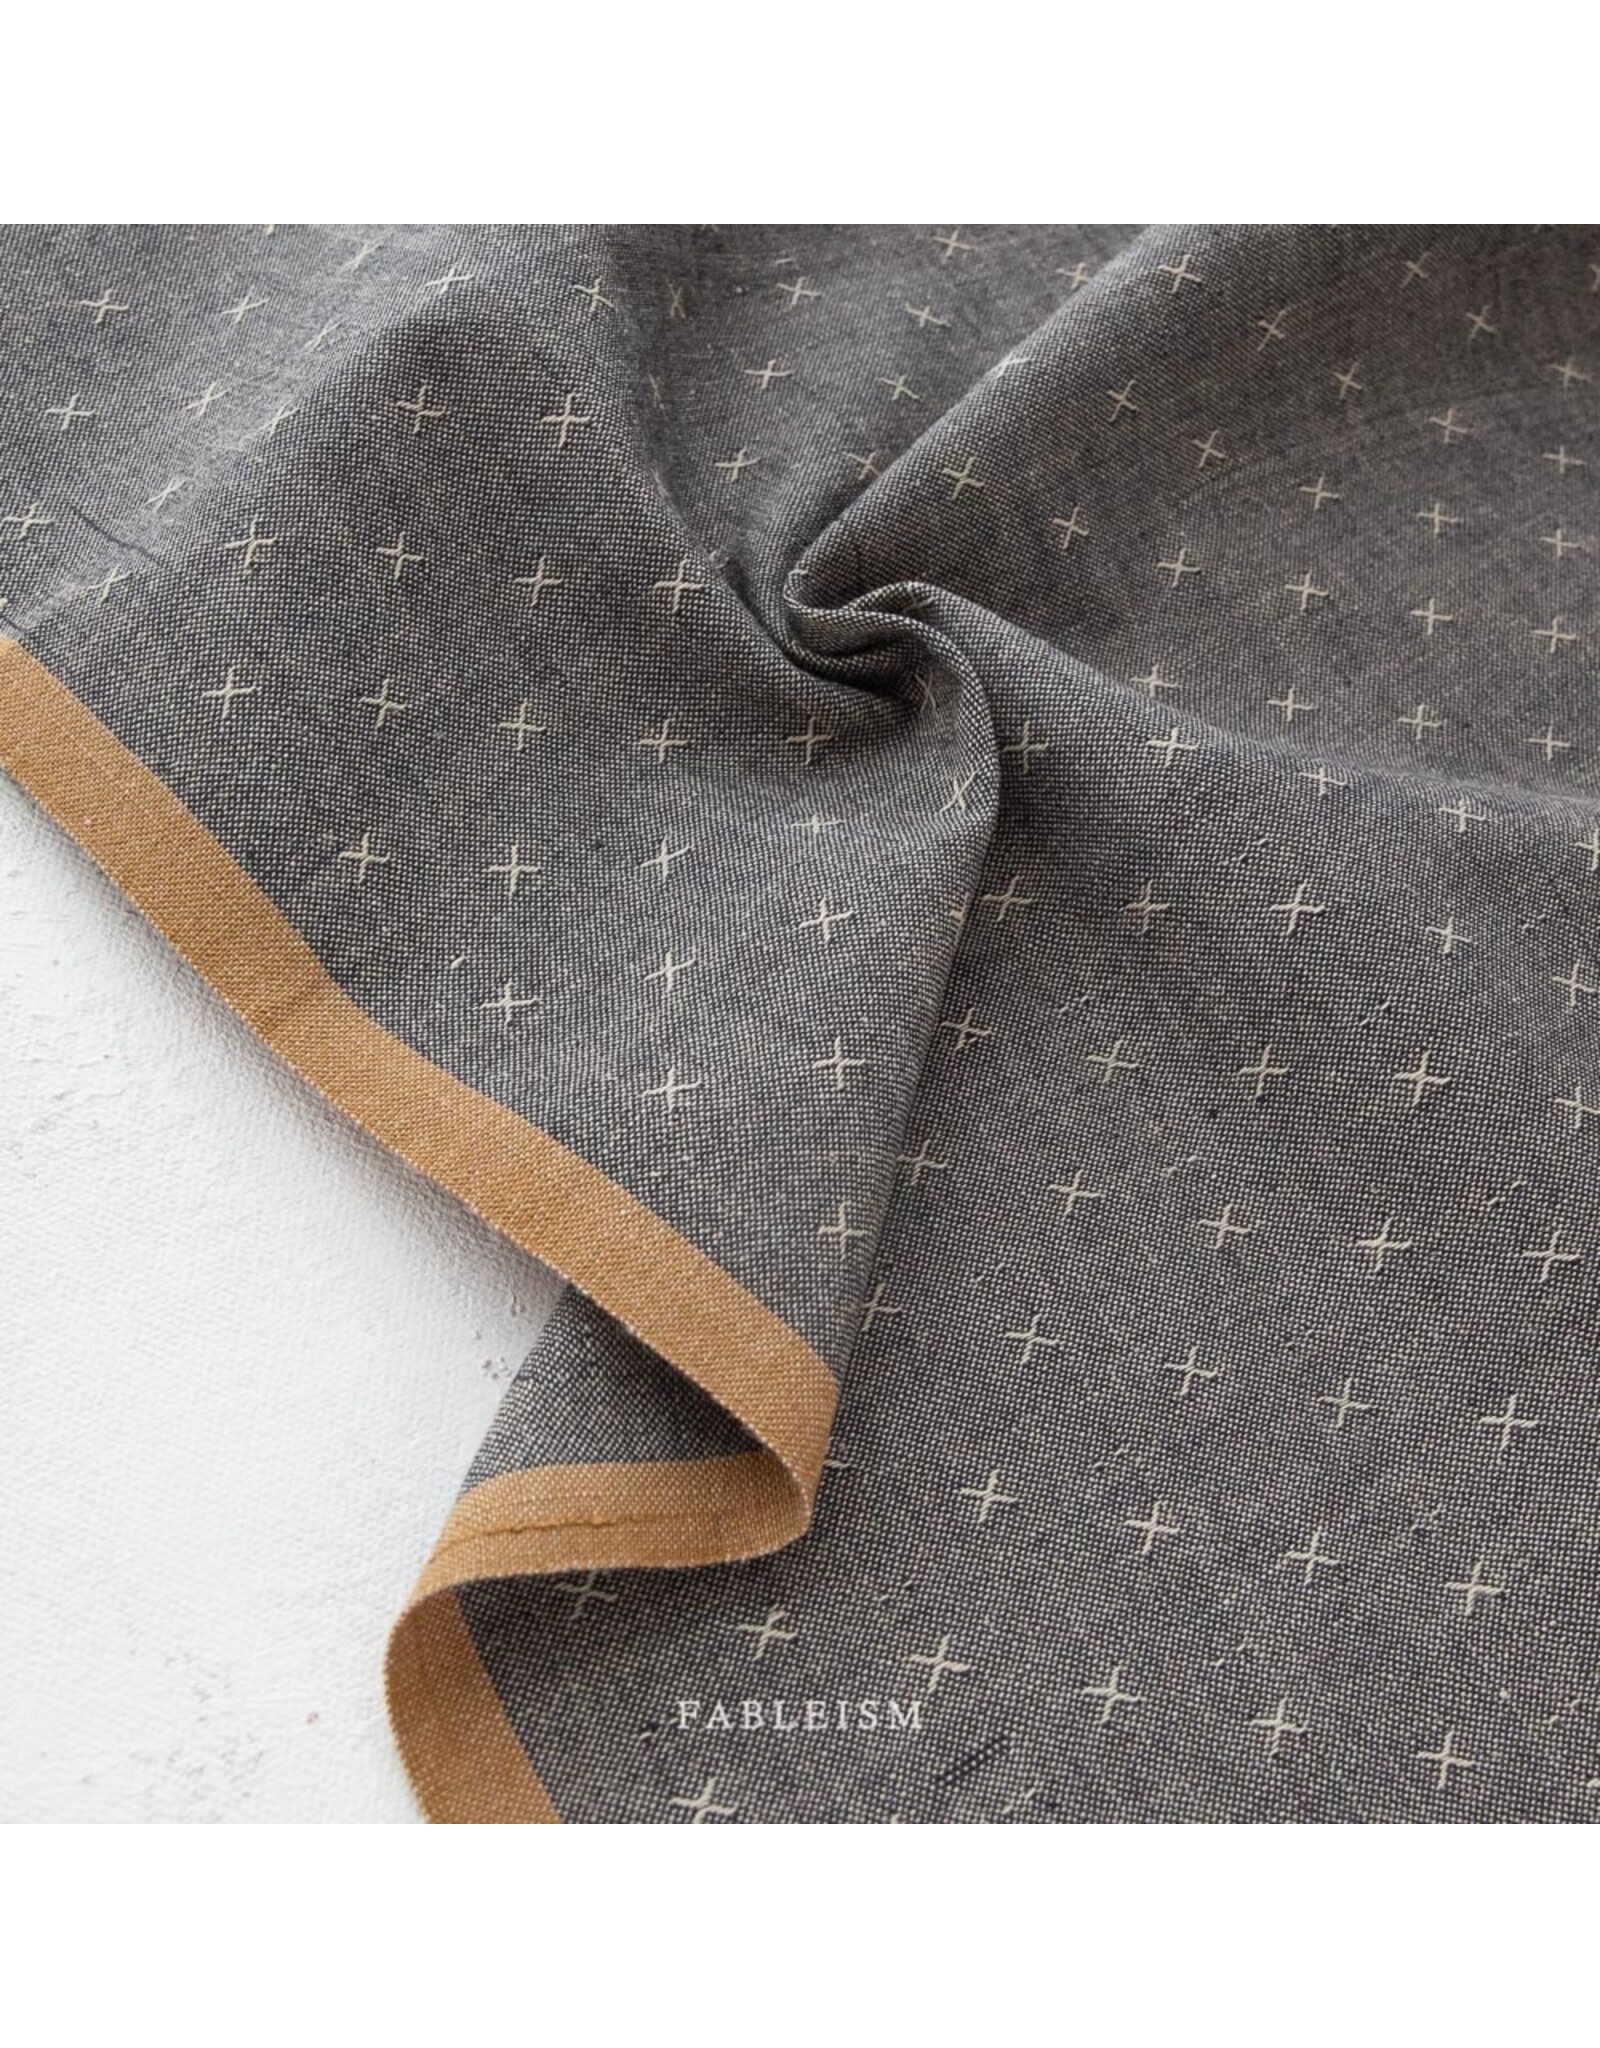 Fableism Sprout Wovens, Pepper, Fabric Half-Yards